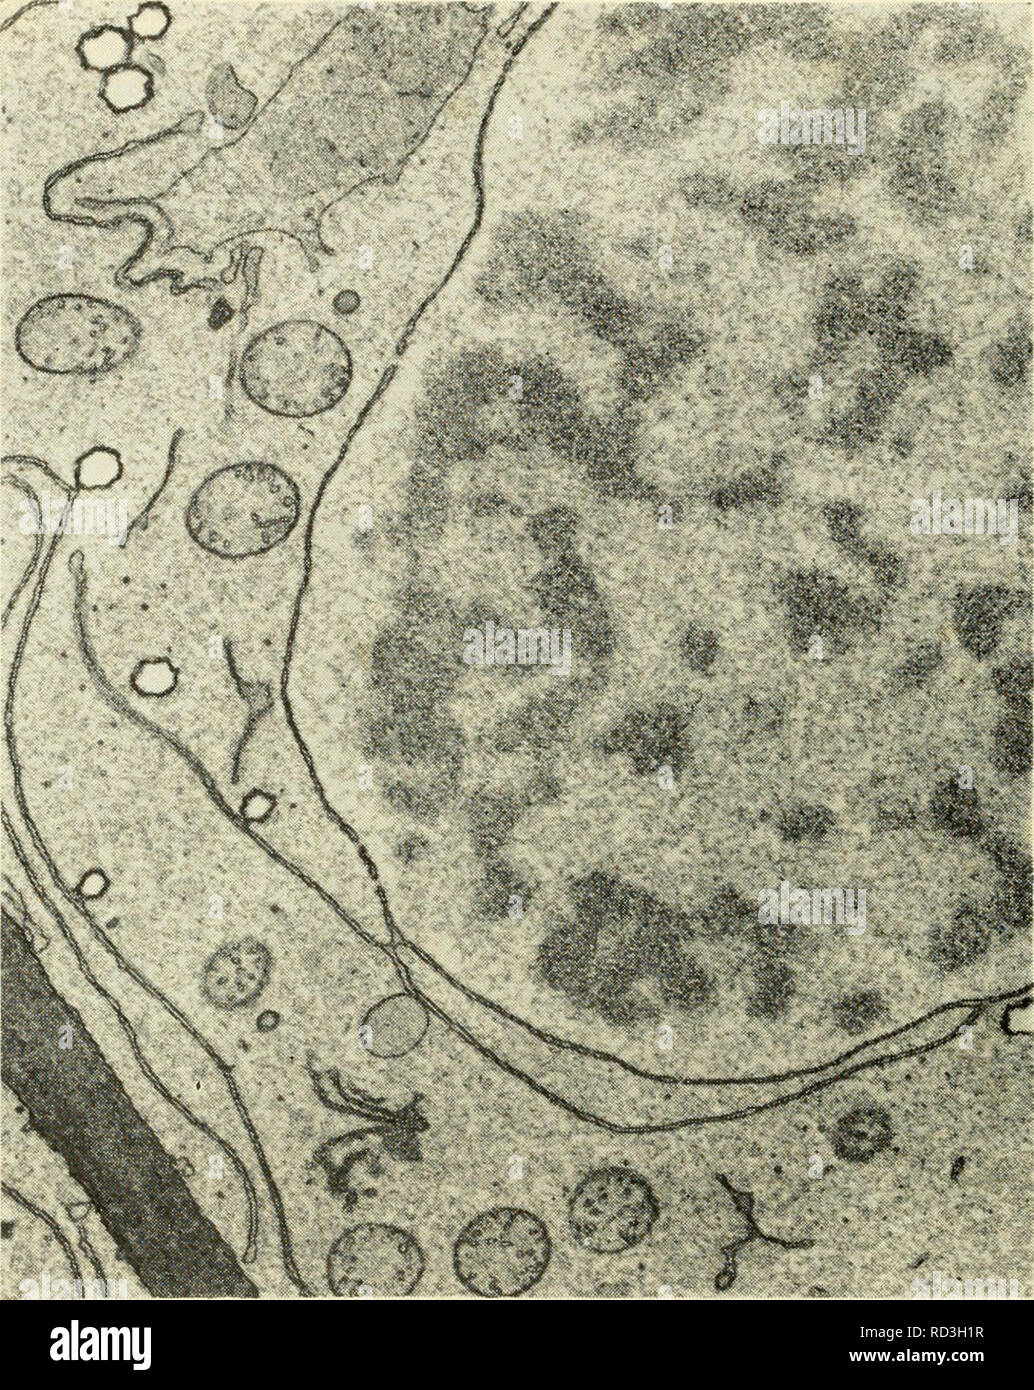 . Cytology. Cytology. various elements of the endoplasmic reticulum have been interpreted as indicating either that the nuclear envelope is a modification of the cyto- plasmic membrane system or that certain membrane components of the. Figure 4-5. Electron Micrograph of Portion of a Meristematic Rootcap Cell of Maize, Showing a Double-layered Nuclear Envelope with Distinct Pores. Note continuity of the outer membrane of the nuclear envelope with double membrane element of the endoplasmic reticulum. Mitochondria, a Golgi apparatus (lower left in figure), and unidentified cytoplasmic inclusions  Stock Photo